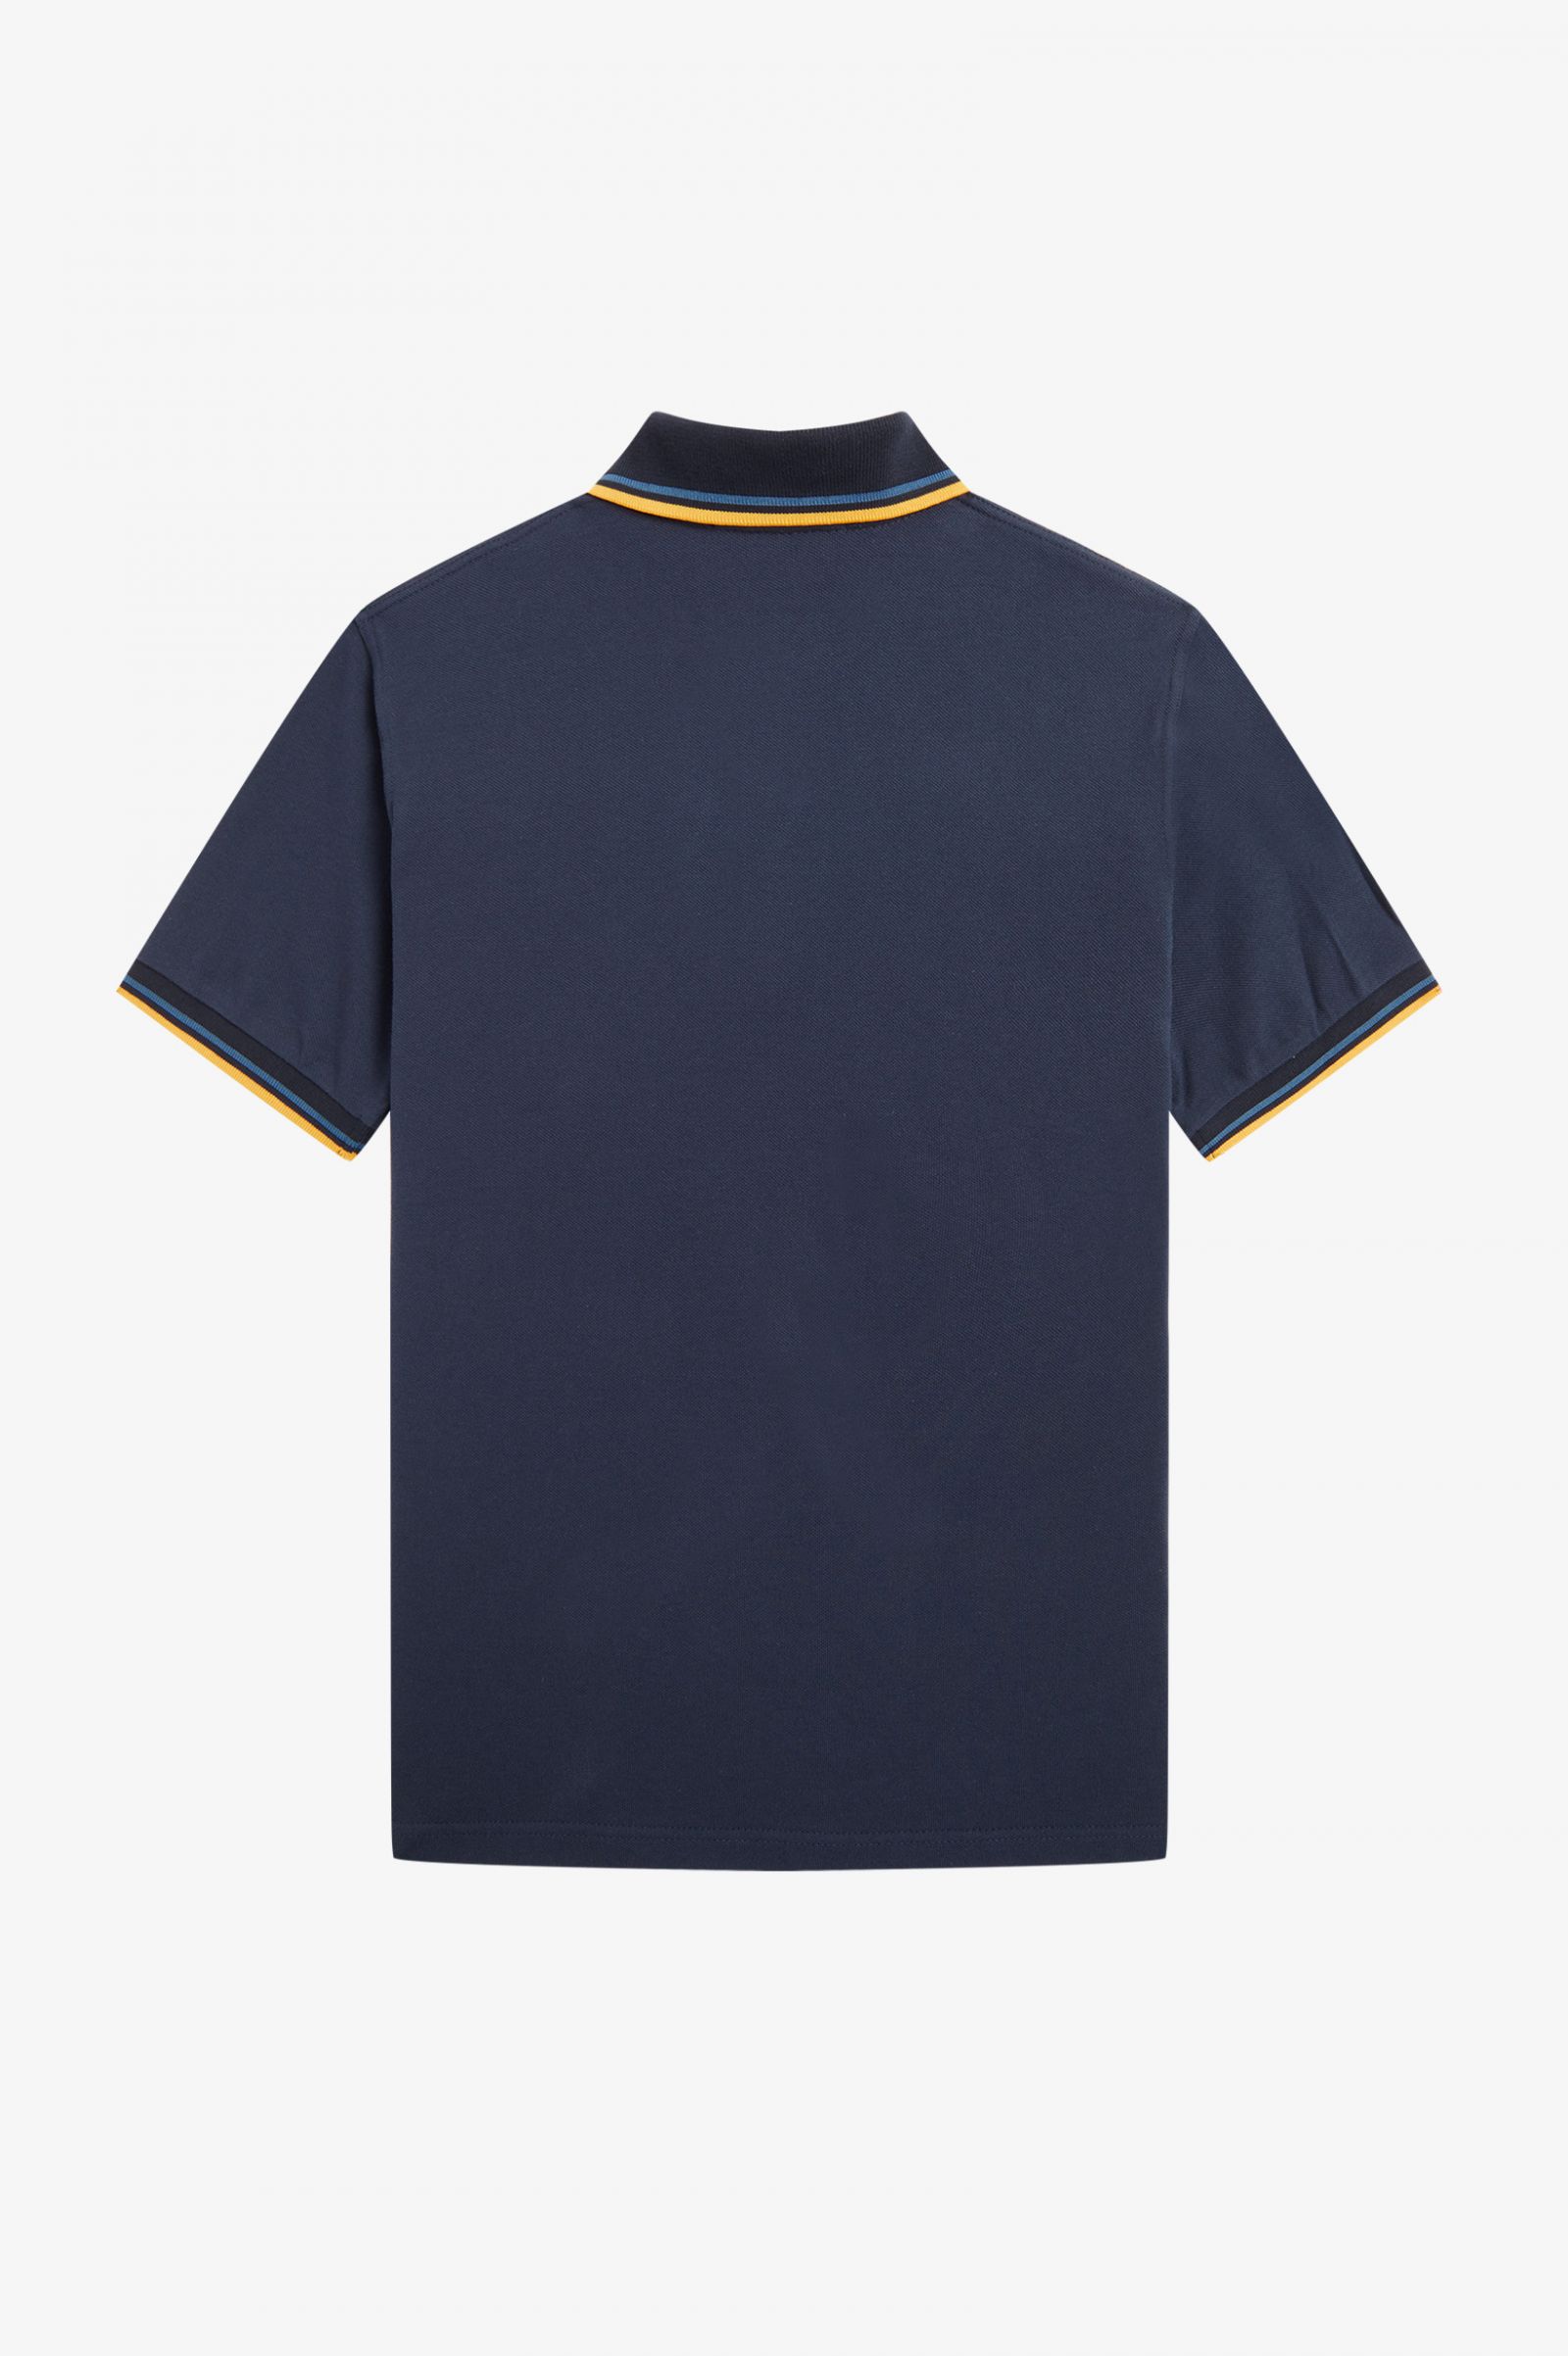 Fred Perry Poloshirt M12 in Navy/Blue/Gold